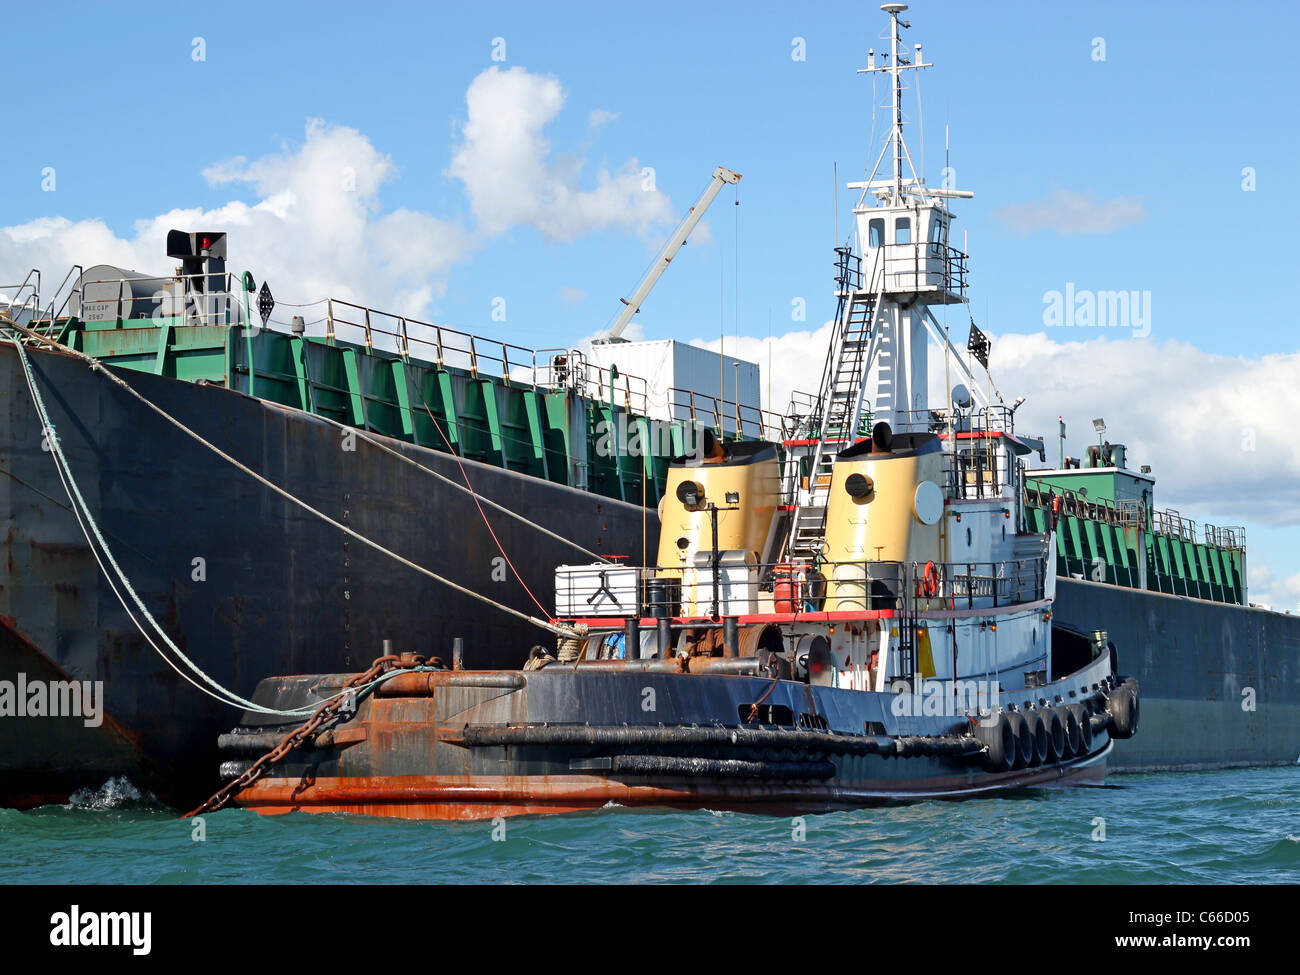 Fuel barge with tug boat in the bay Stock Photo